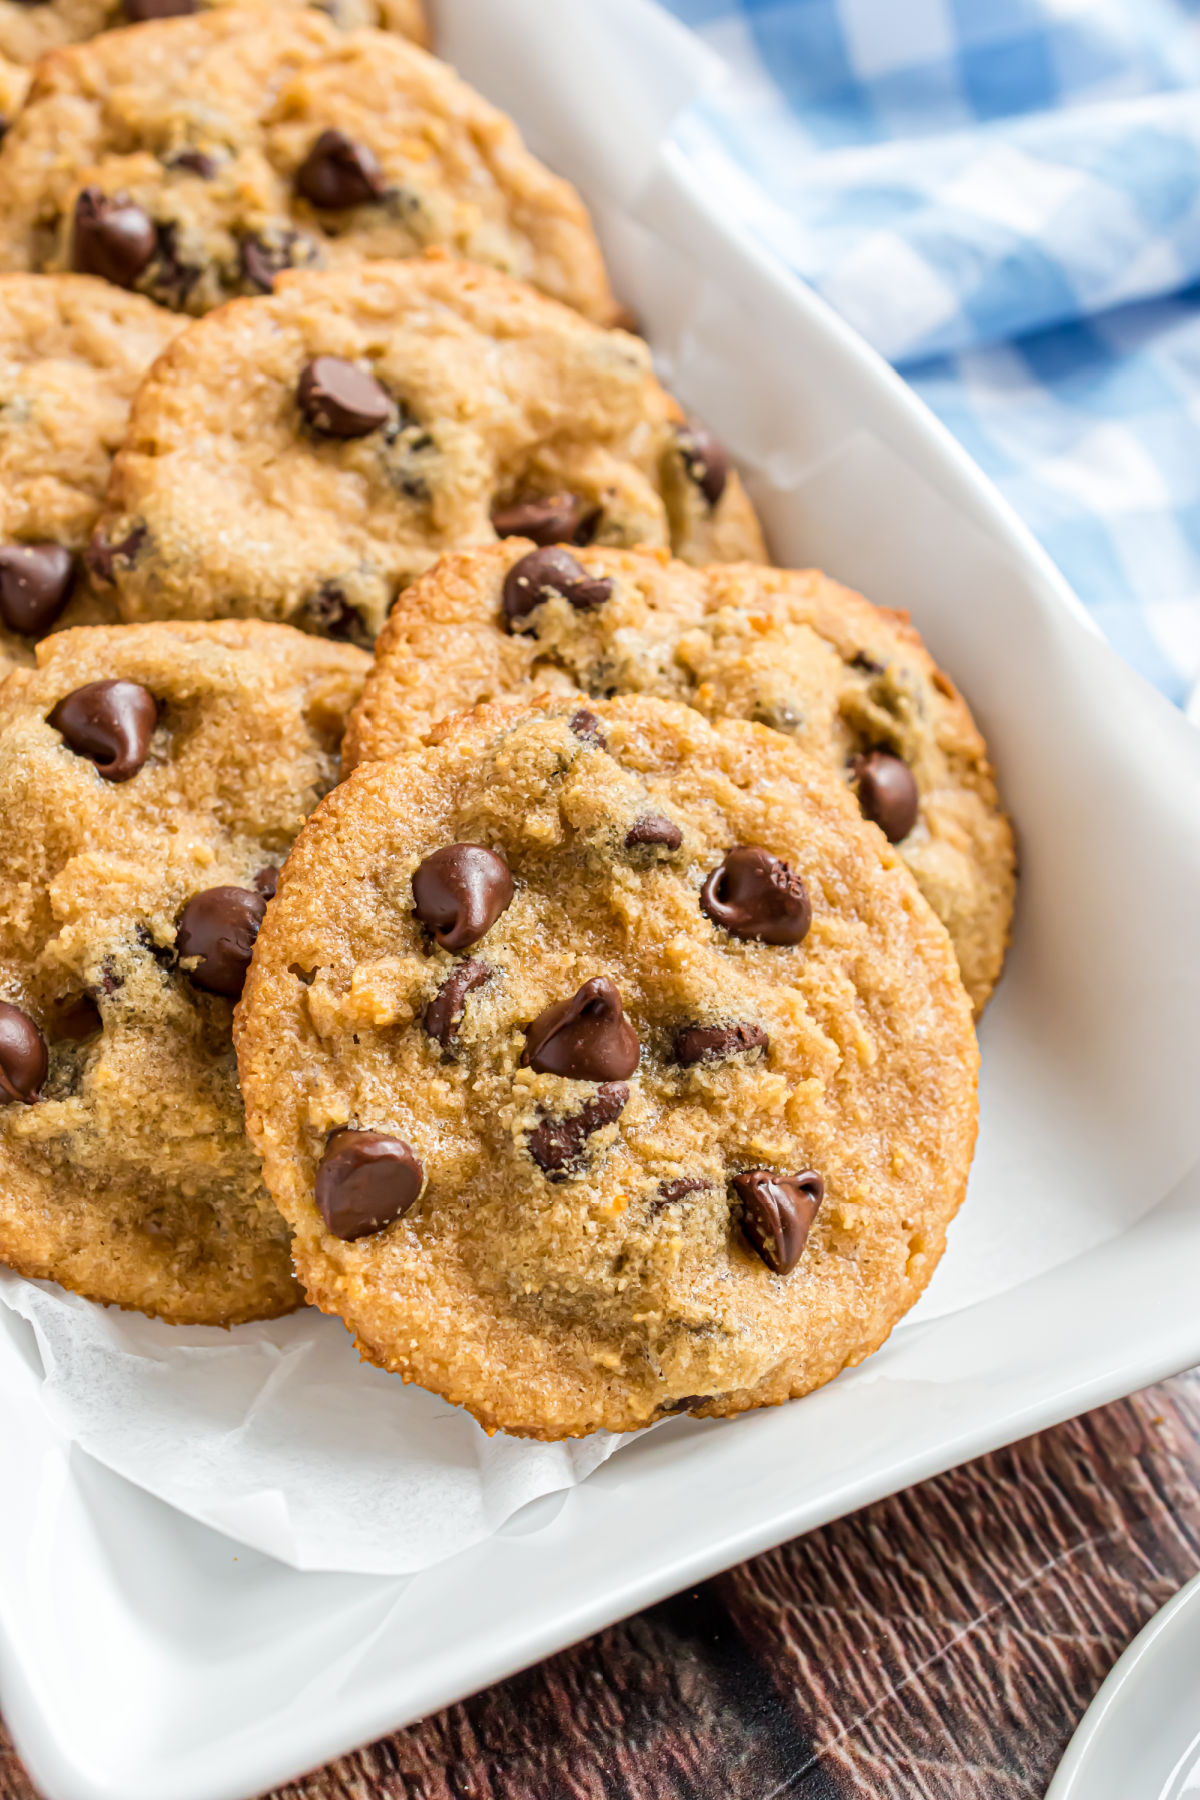 Chocolate chip cookies on white platter for serving.